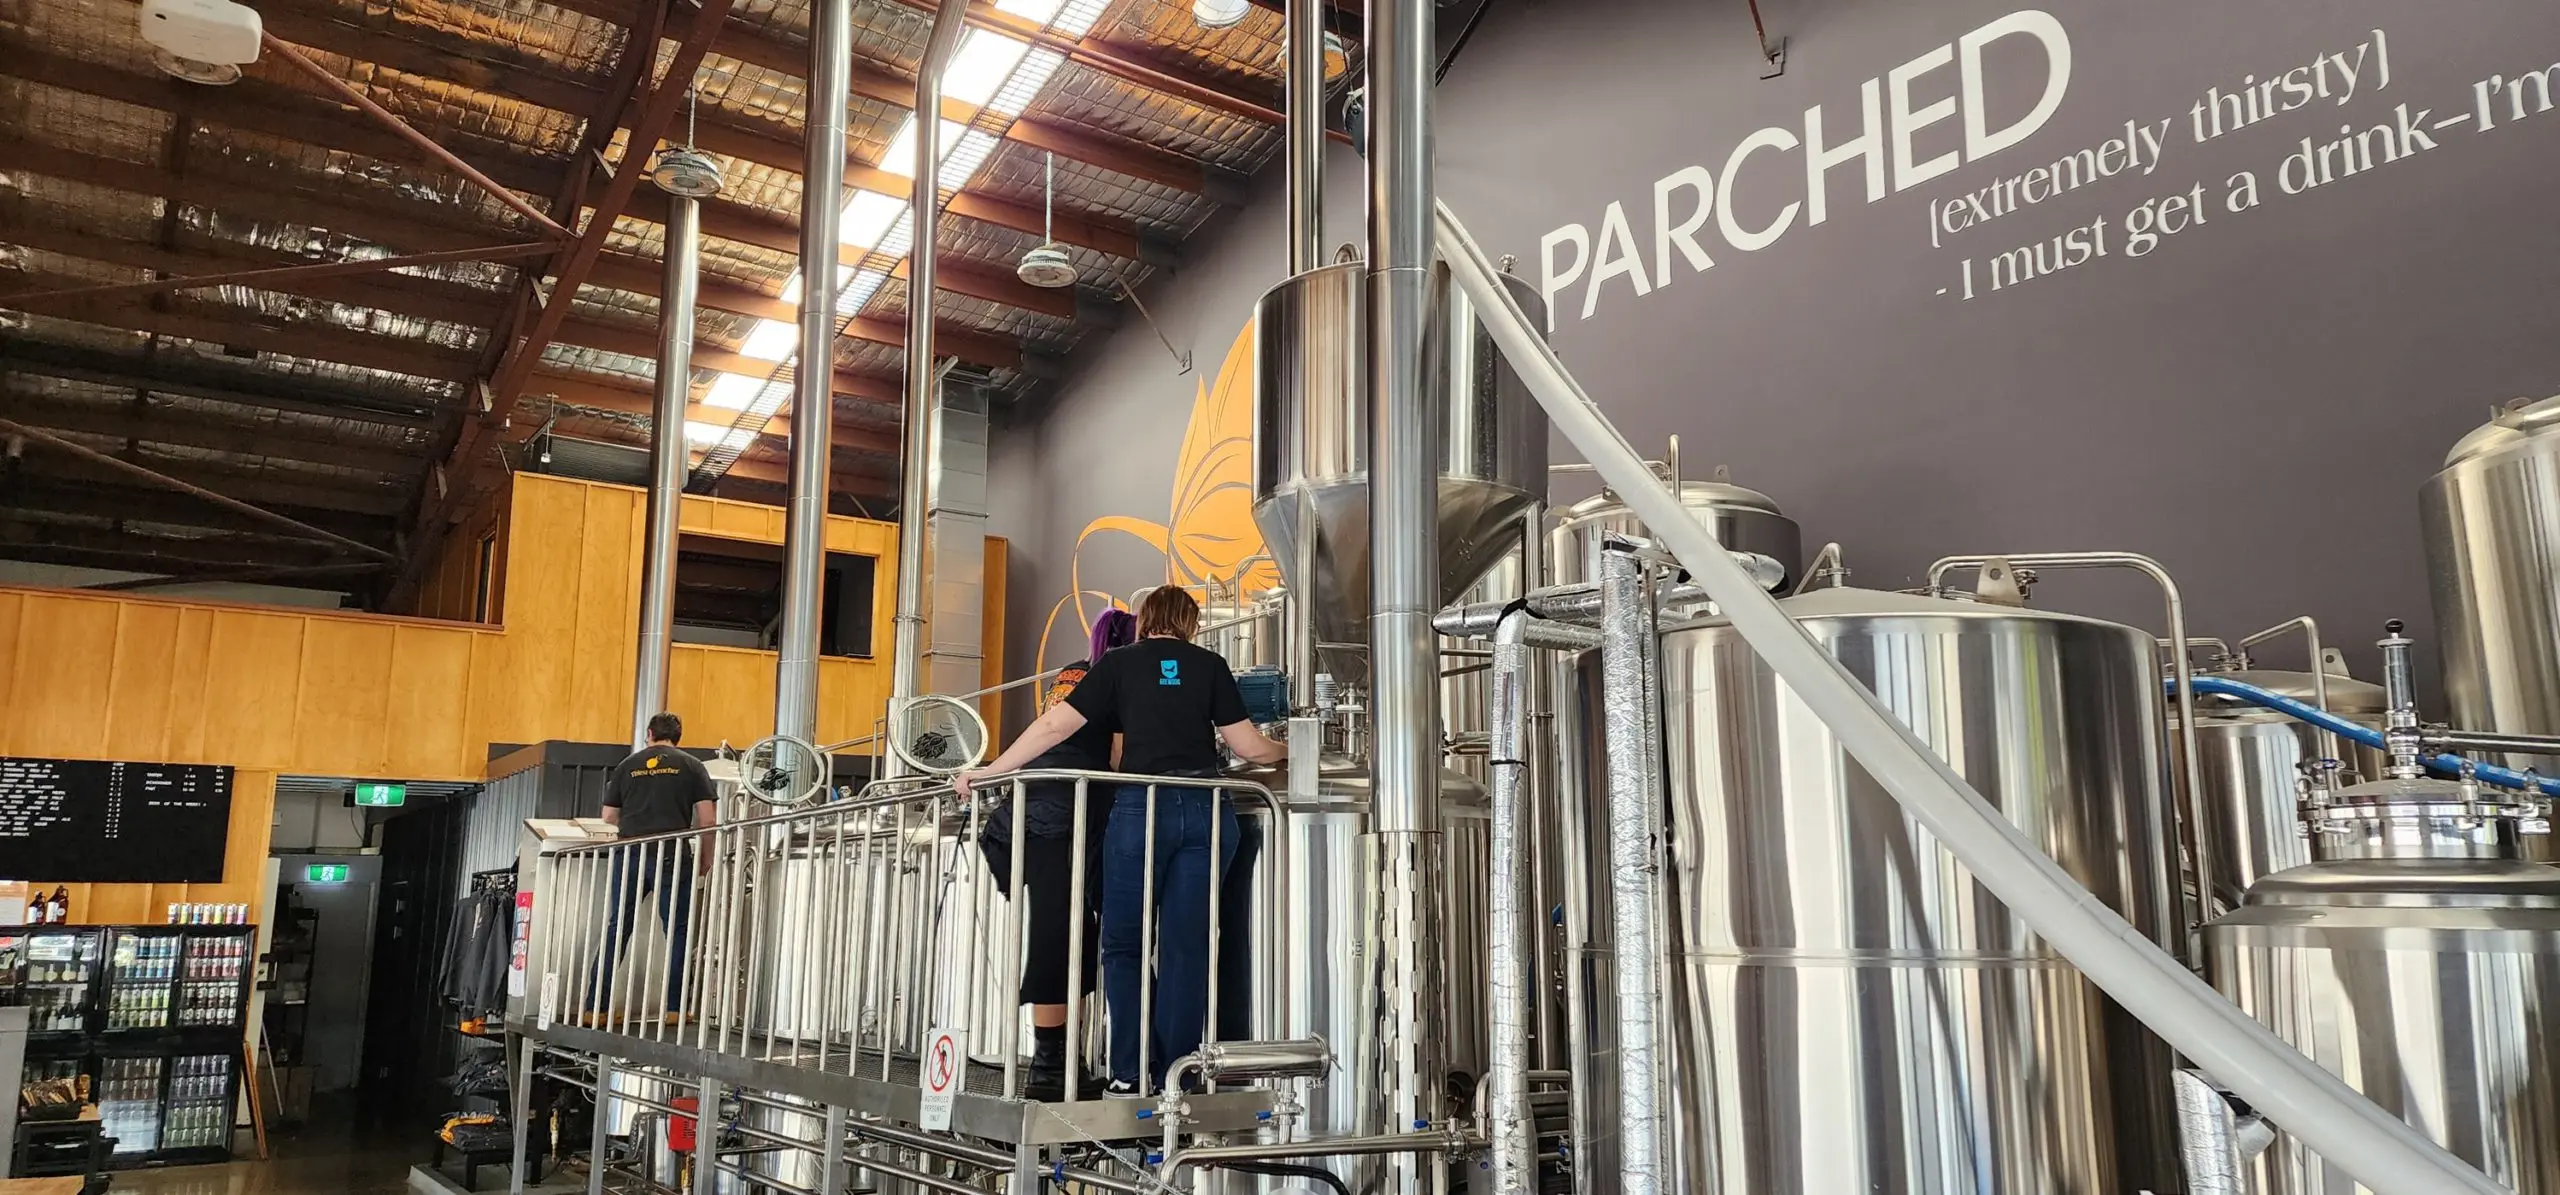 Parched Brewery - Lessons Learned 3